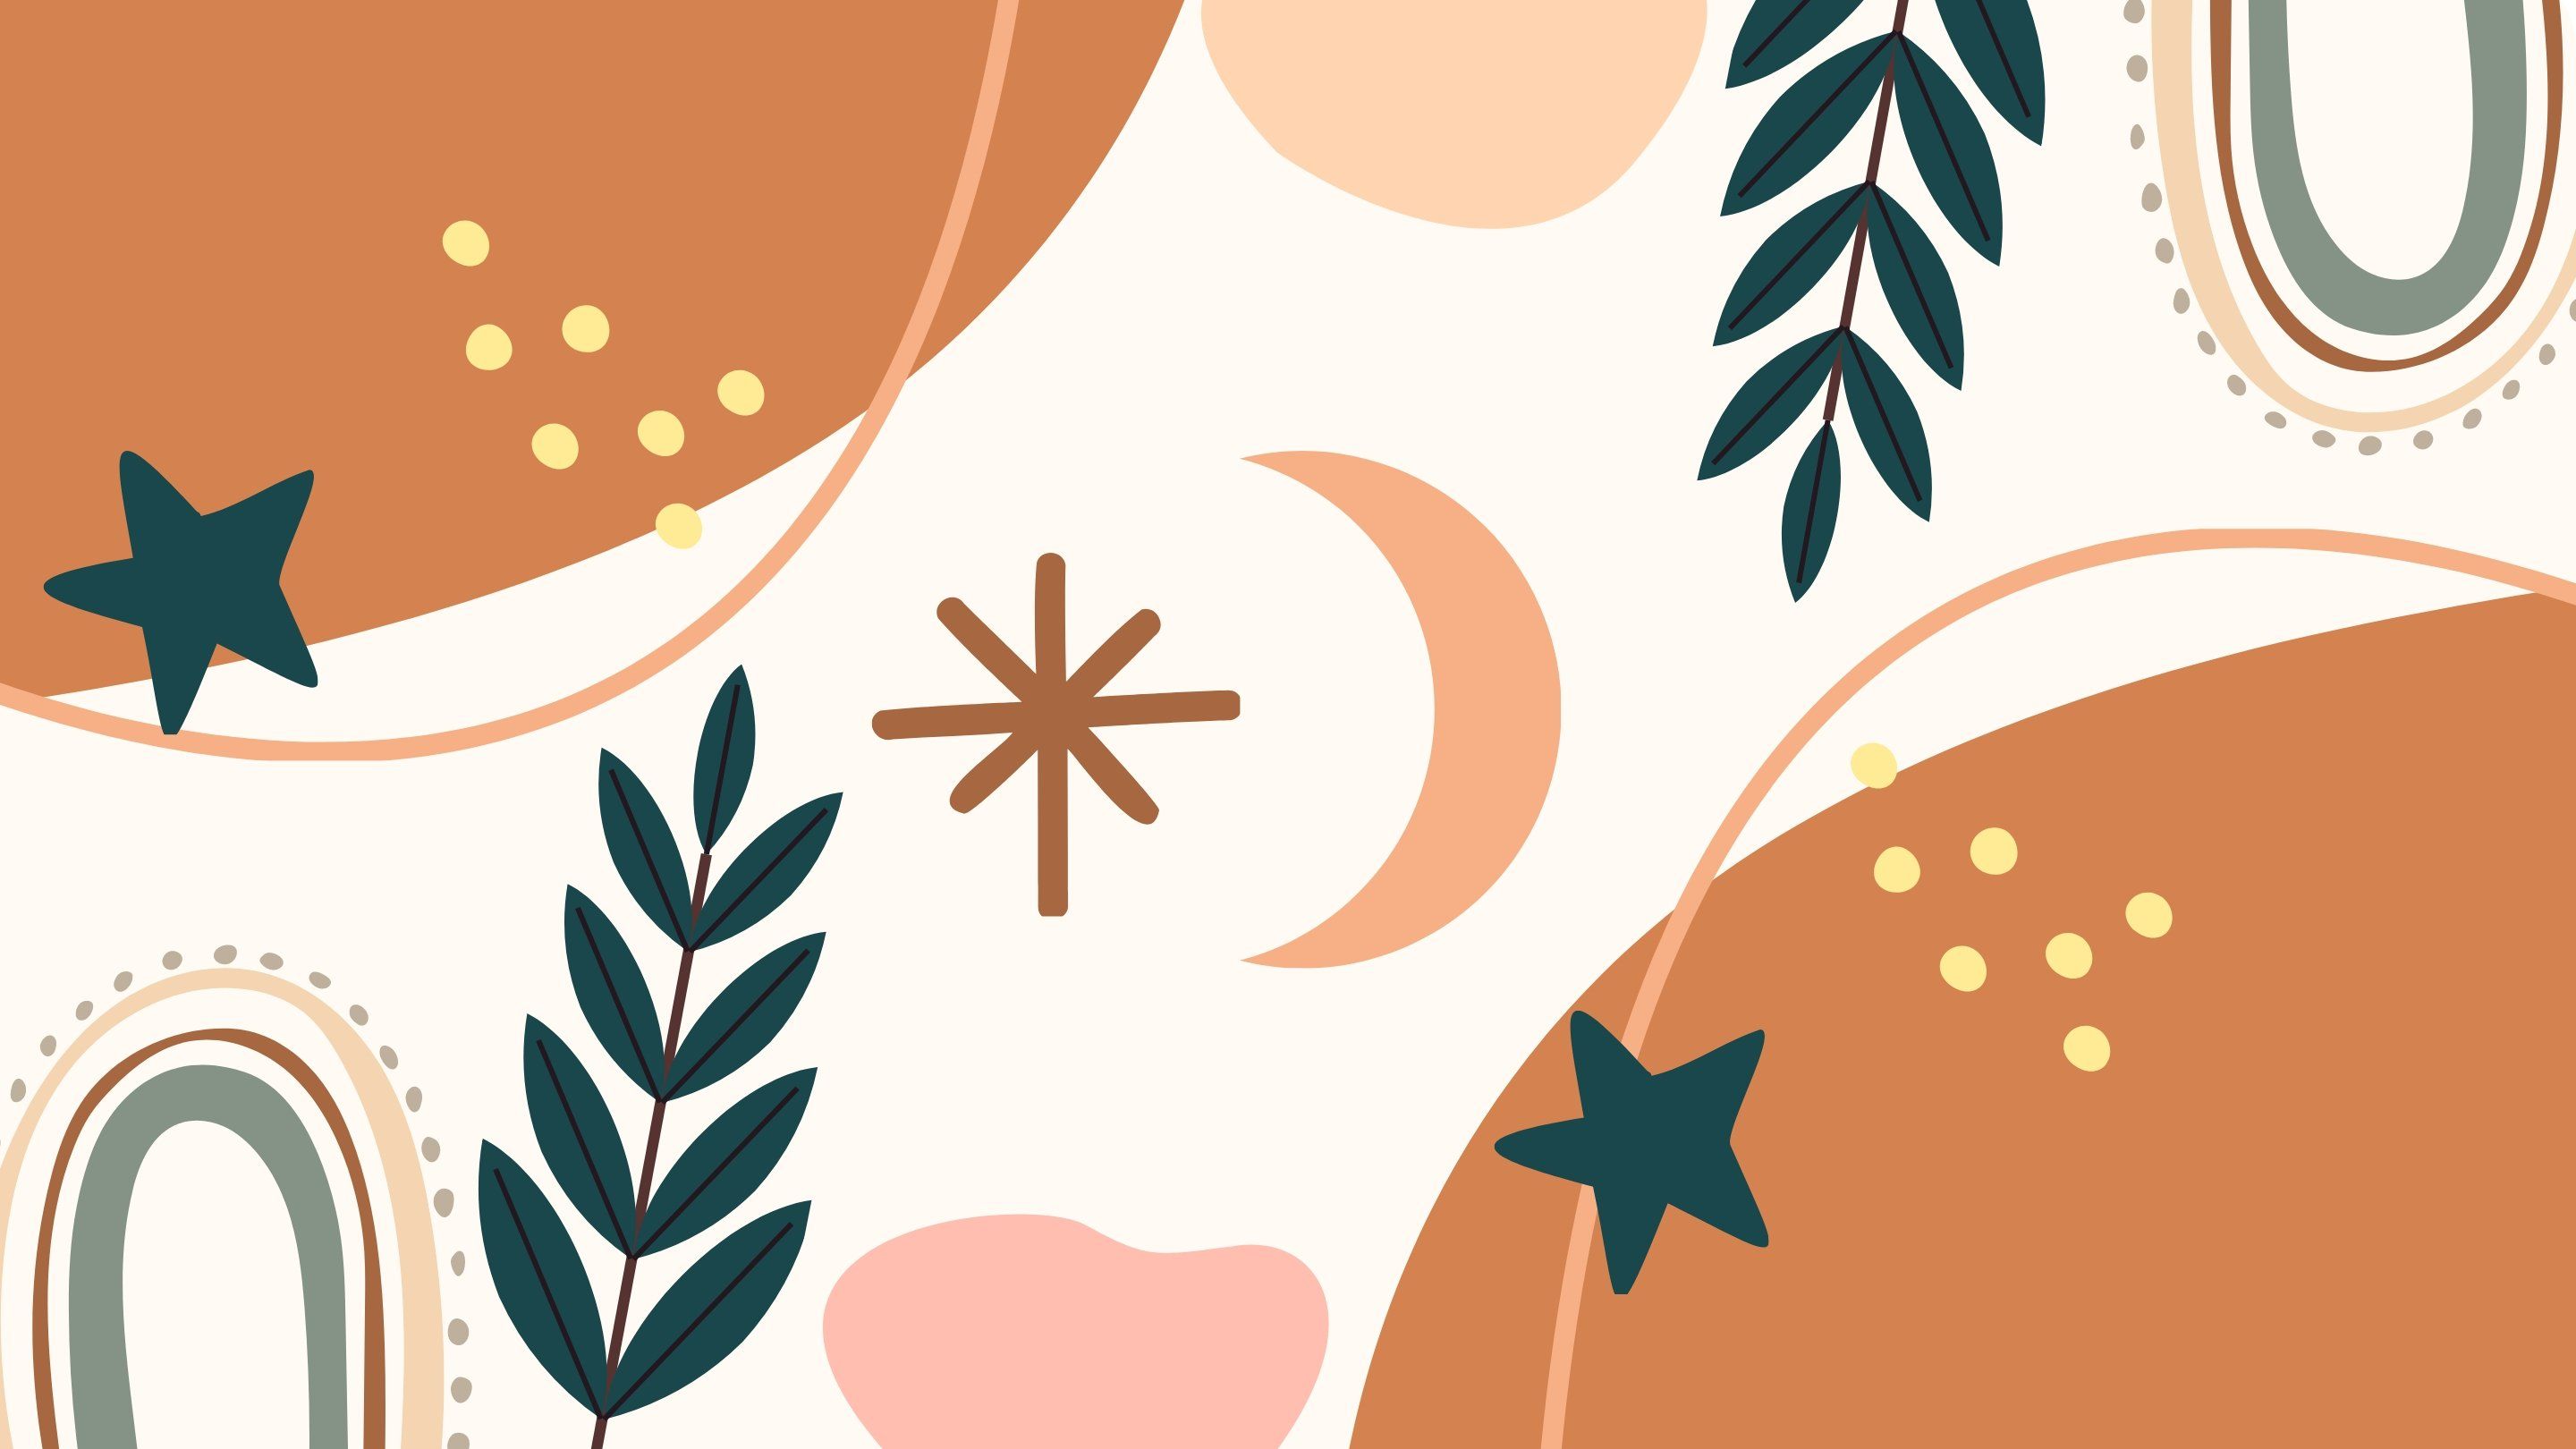 An abstract image with plants, stars, and moon. - Vector